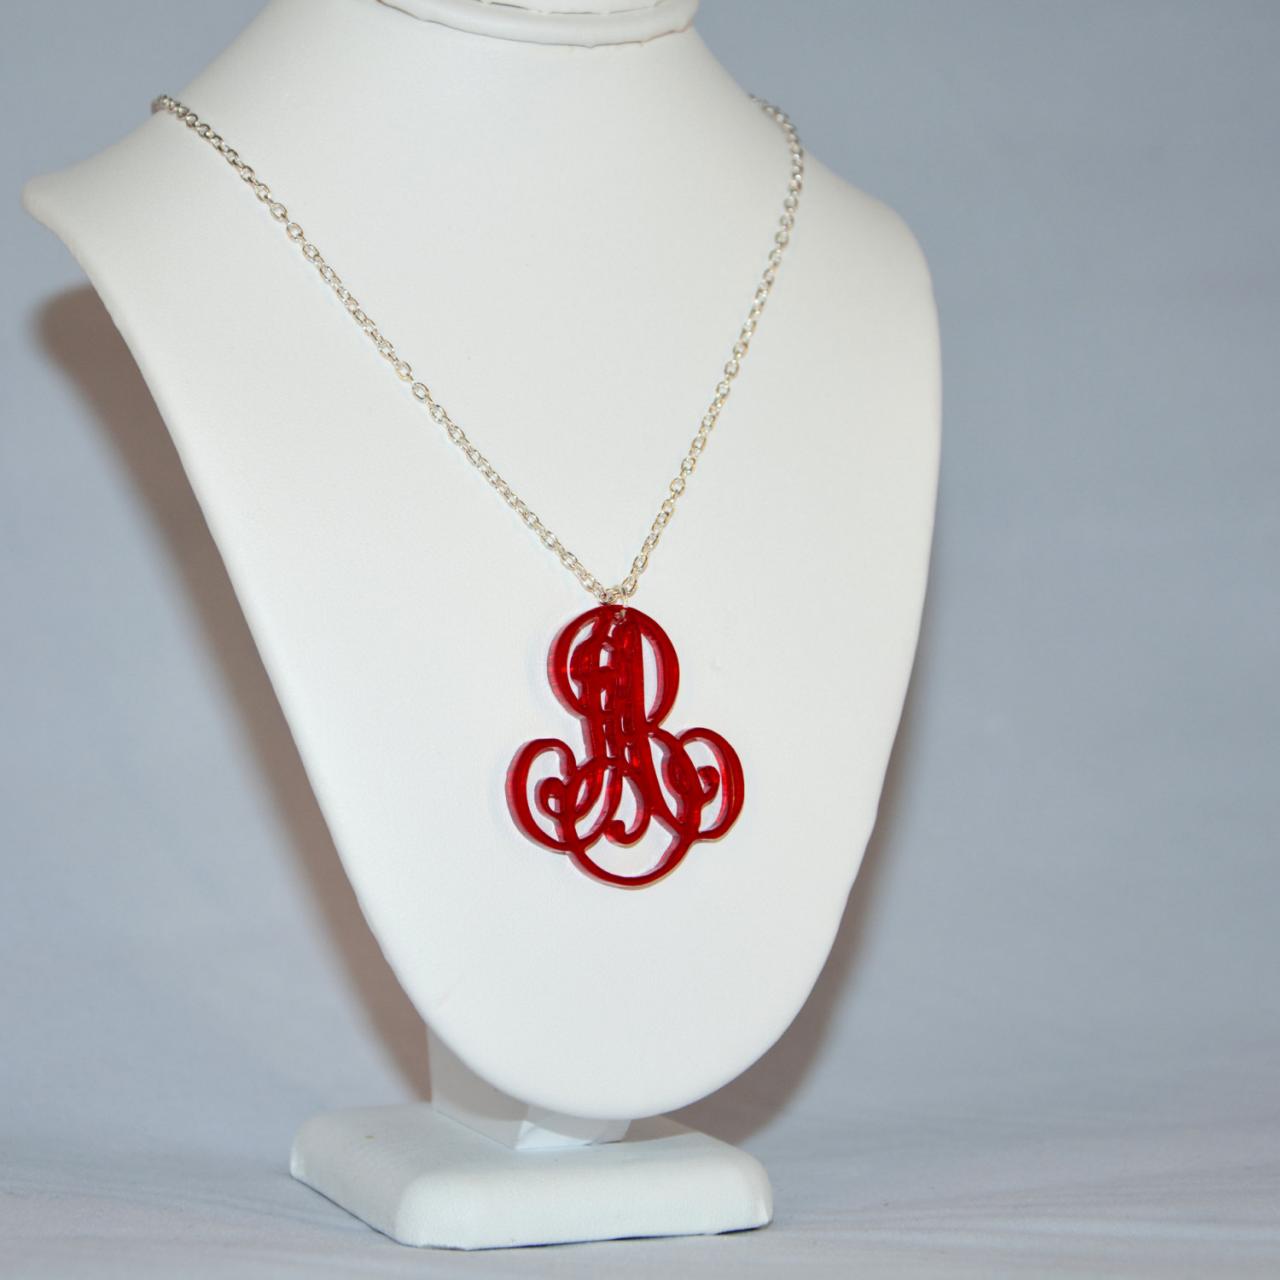 2 Letters Initial Monogram Customized Personalized Plastic Name Necklace